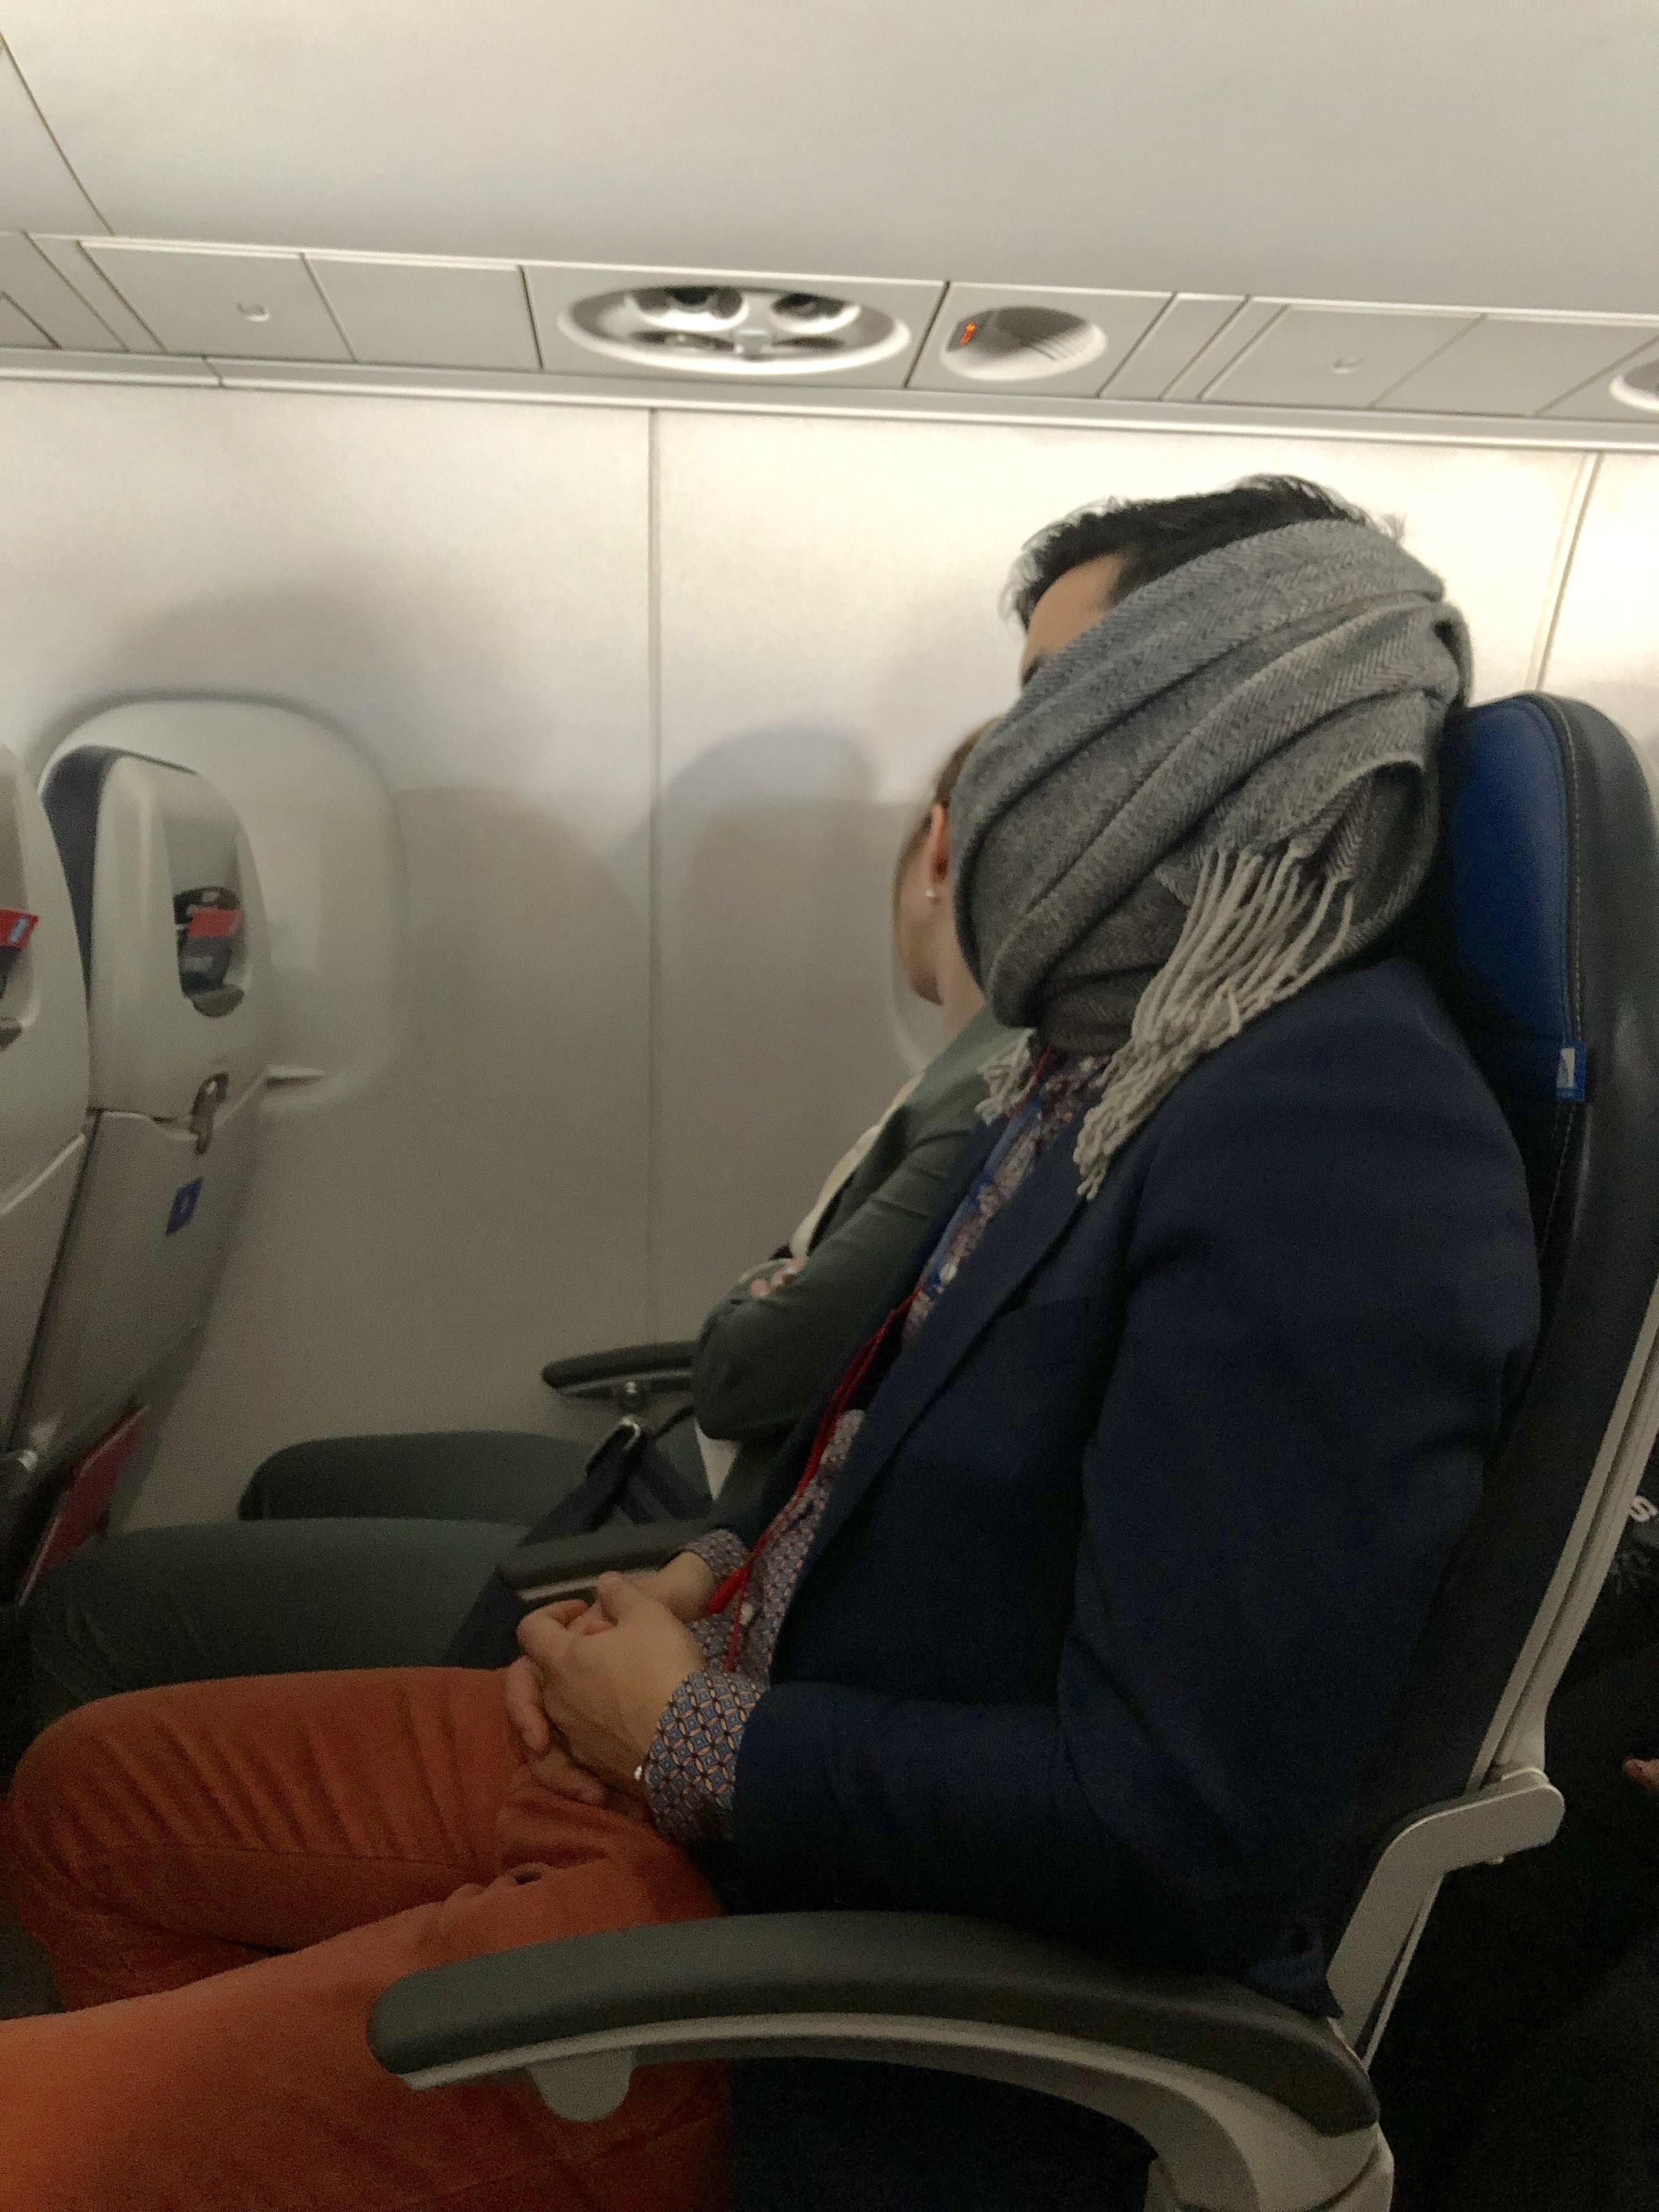 Shoutout to this hero. He woke himself up snoring, covered his mouth with his scarf, and went back to sleep. All I could hear was a slight rumble after that.